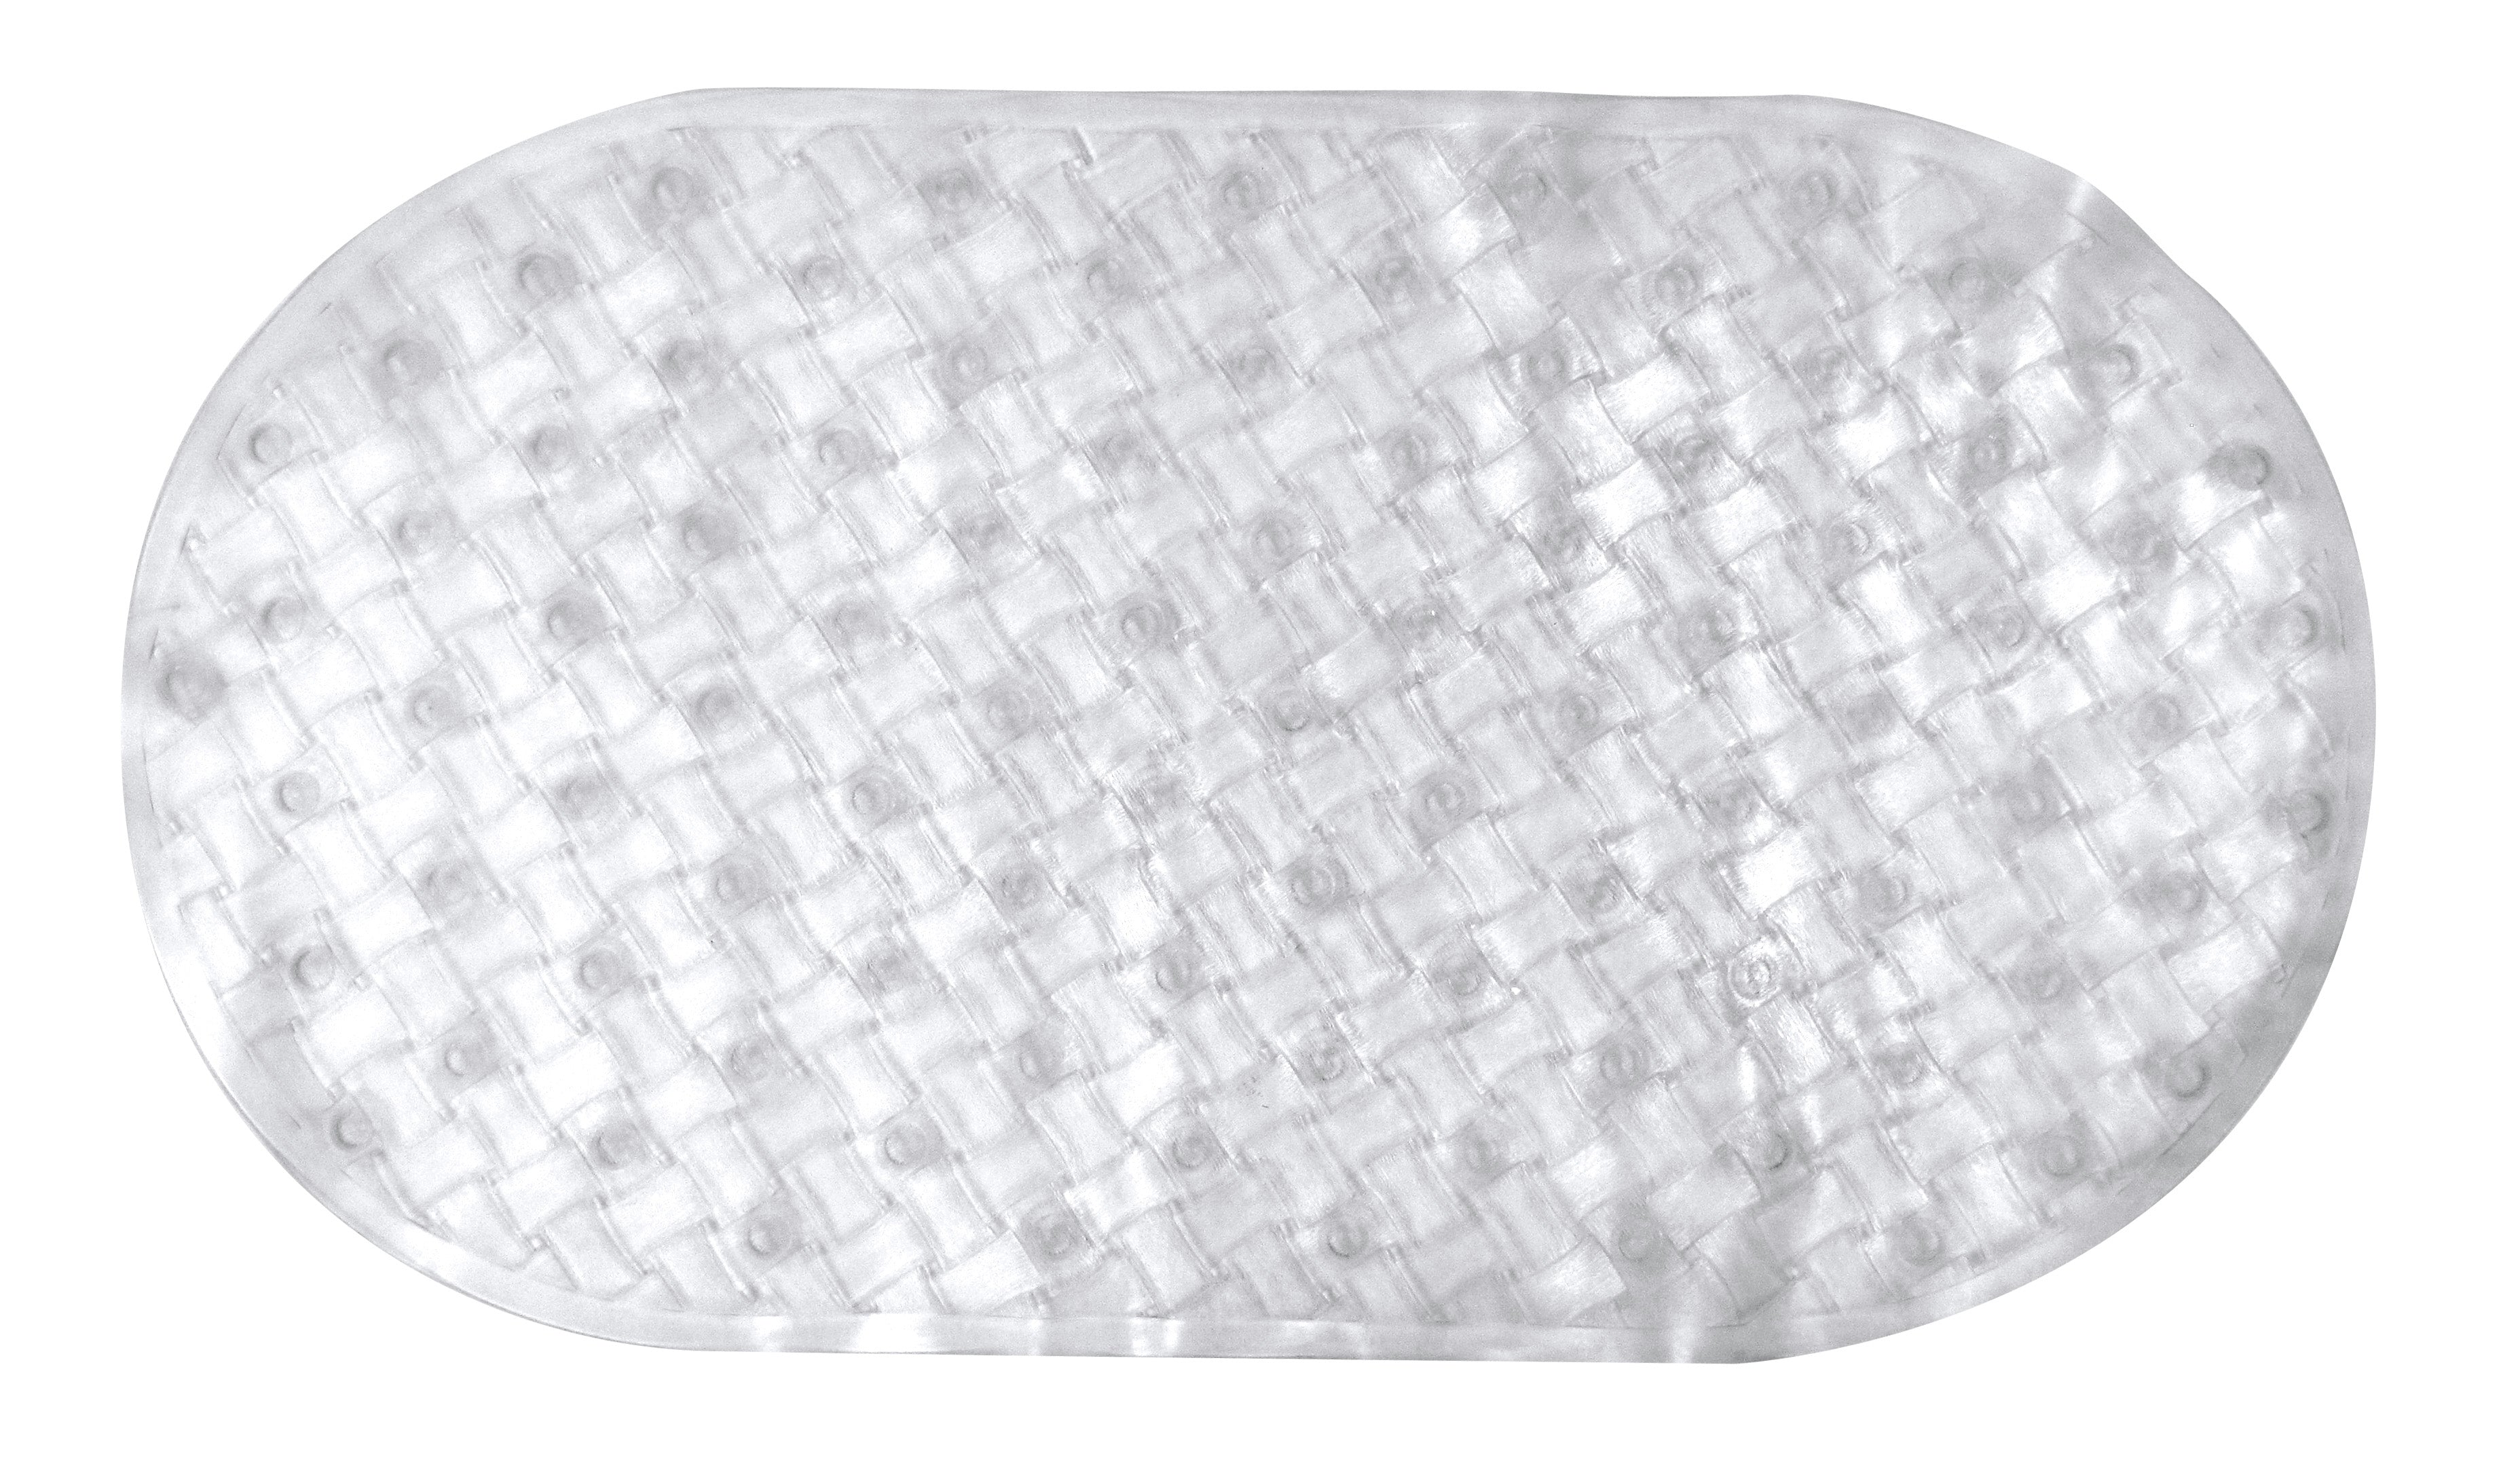 Home+Solutions Clear Oval Bubble Bath Mat, 27.5x15 – Ginsey Home Solutions